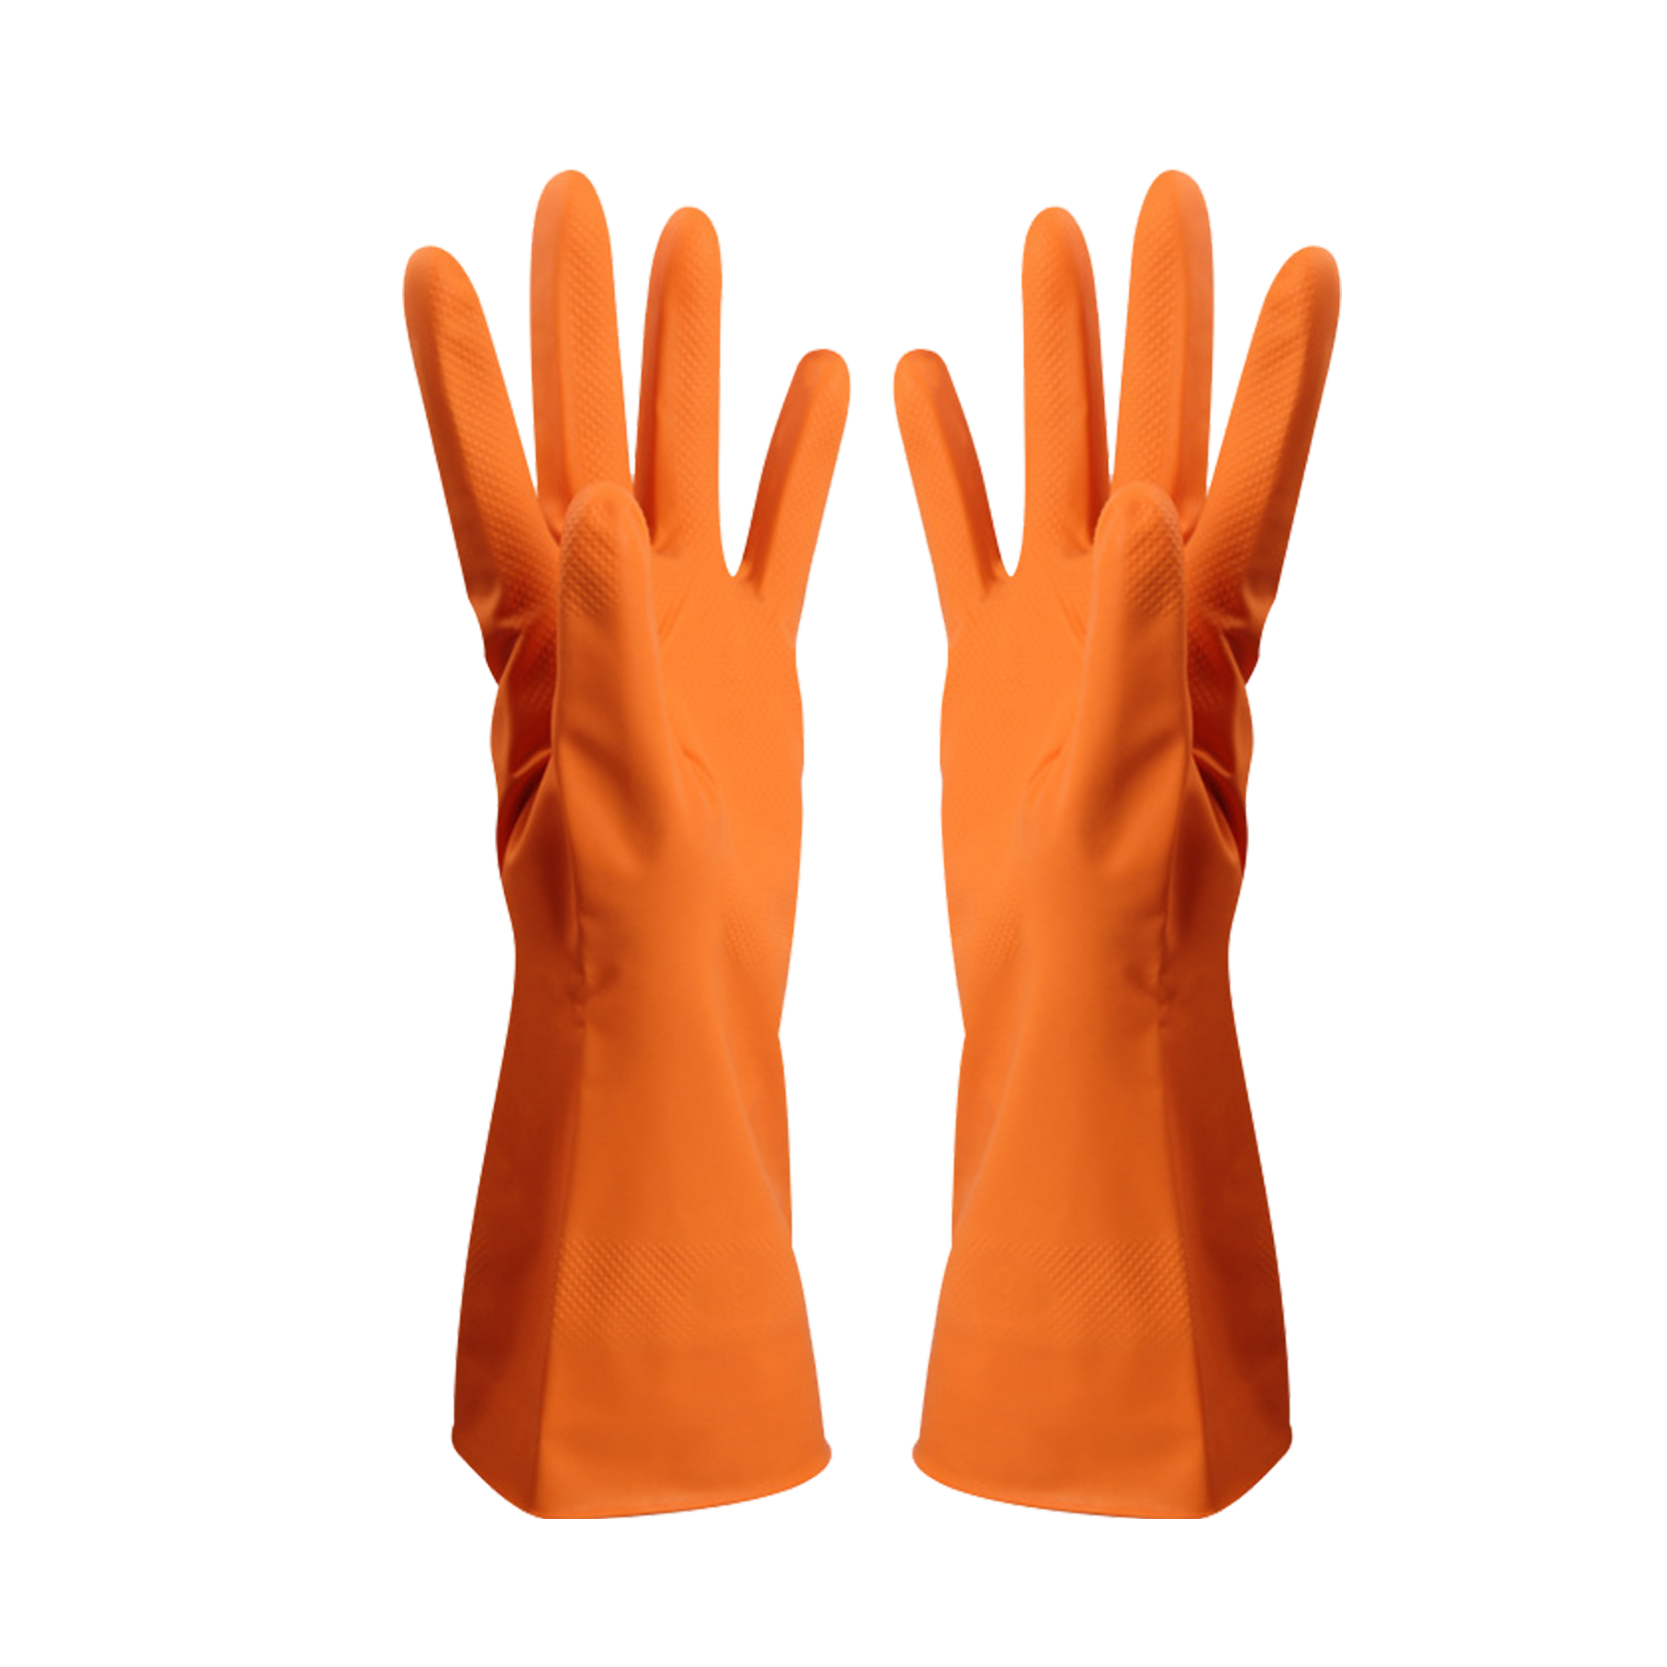 Wholesale Orange Heat Resistance Safety Protective Rubber Cleaning Gloves Food Grade Flocklined Household Latex Glove